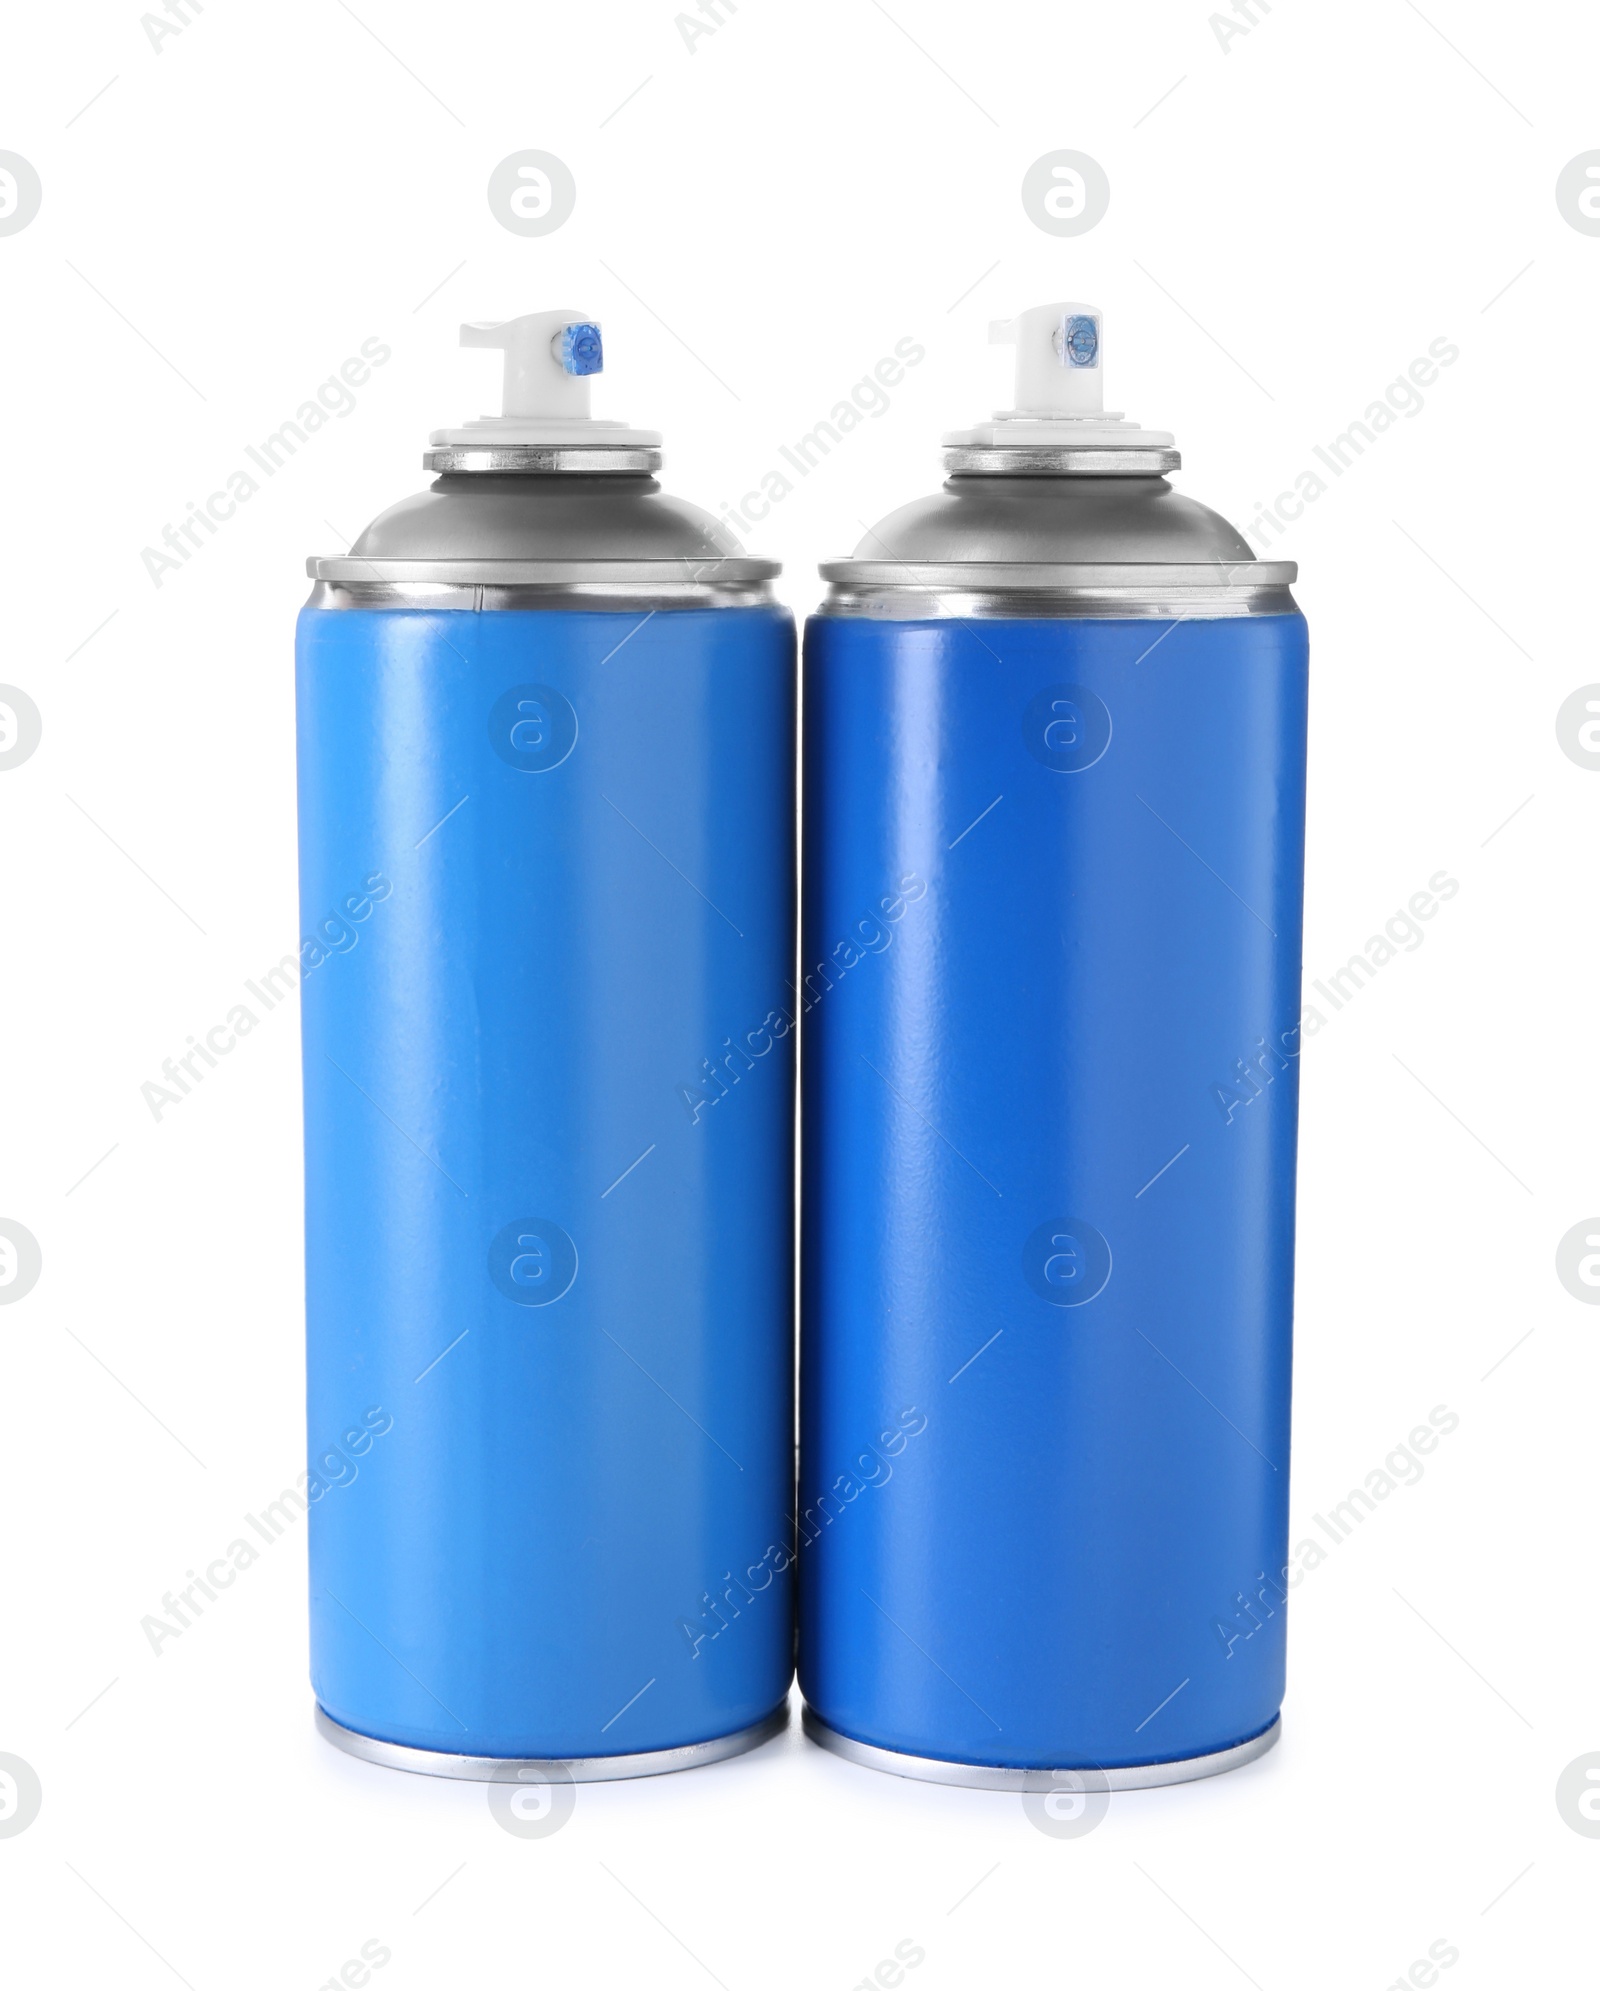 Photo of Blue cans of spray paint isolated on white